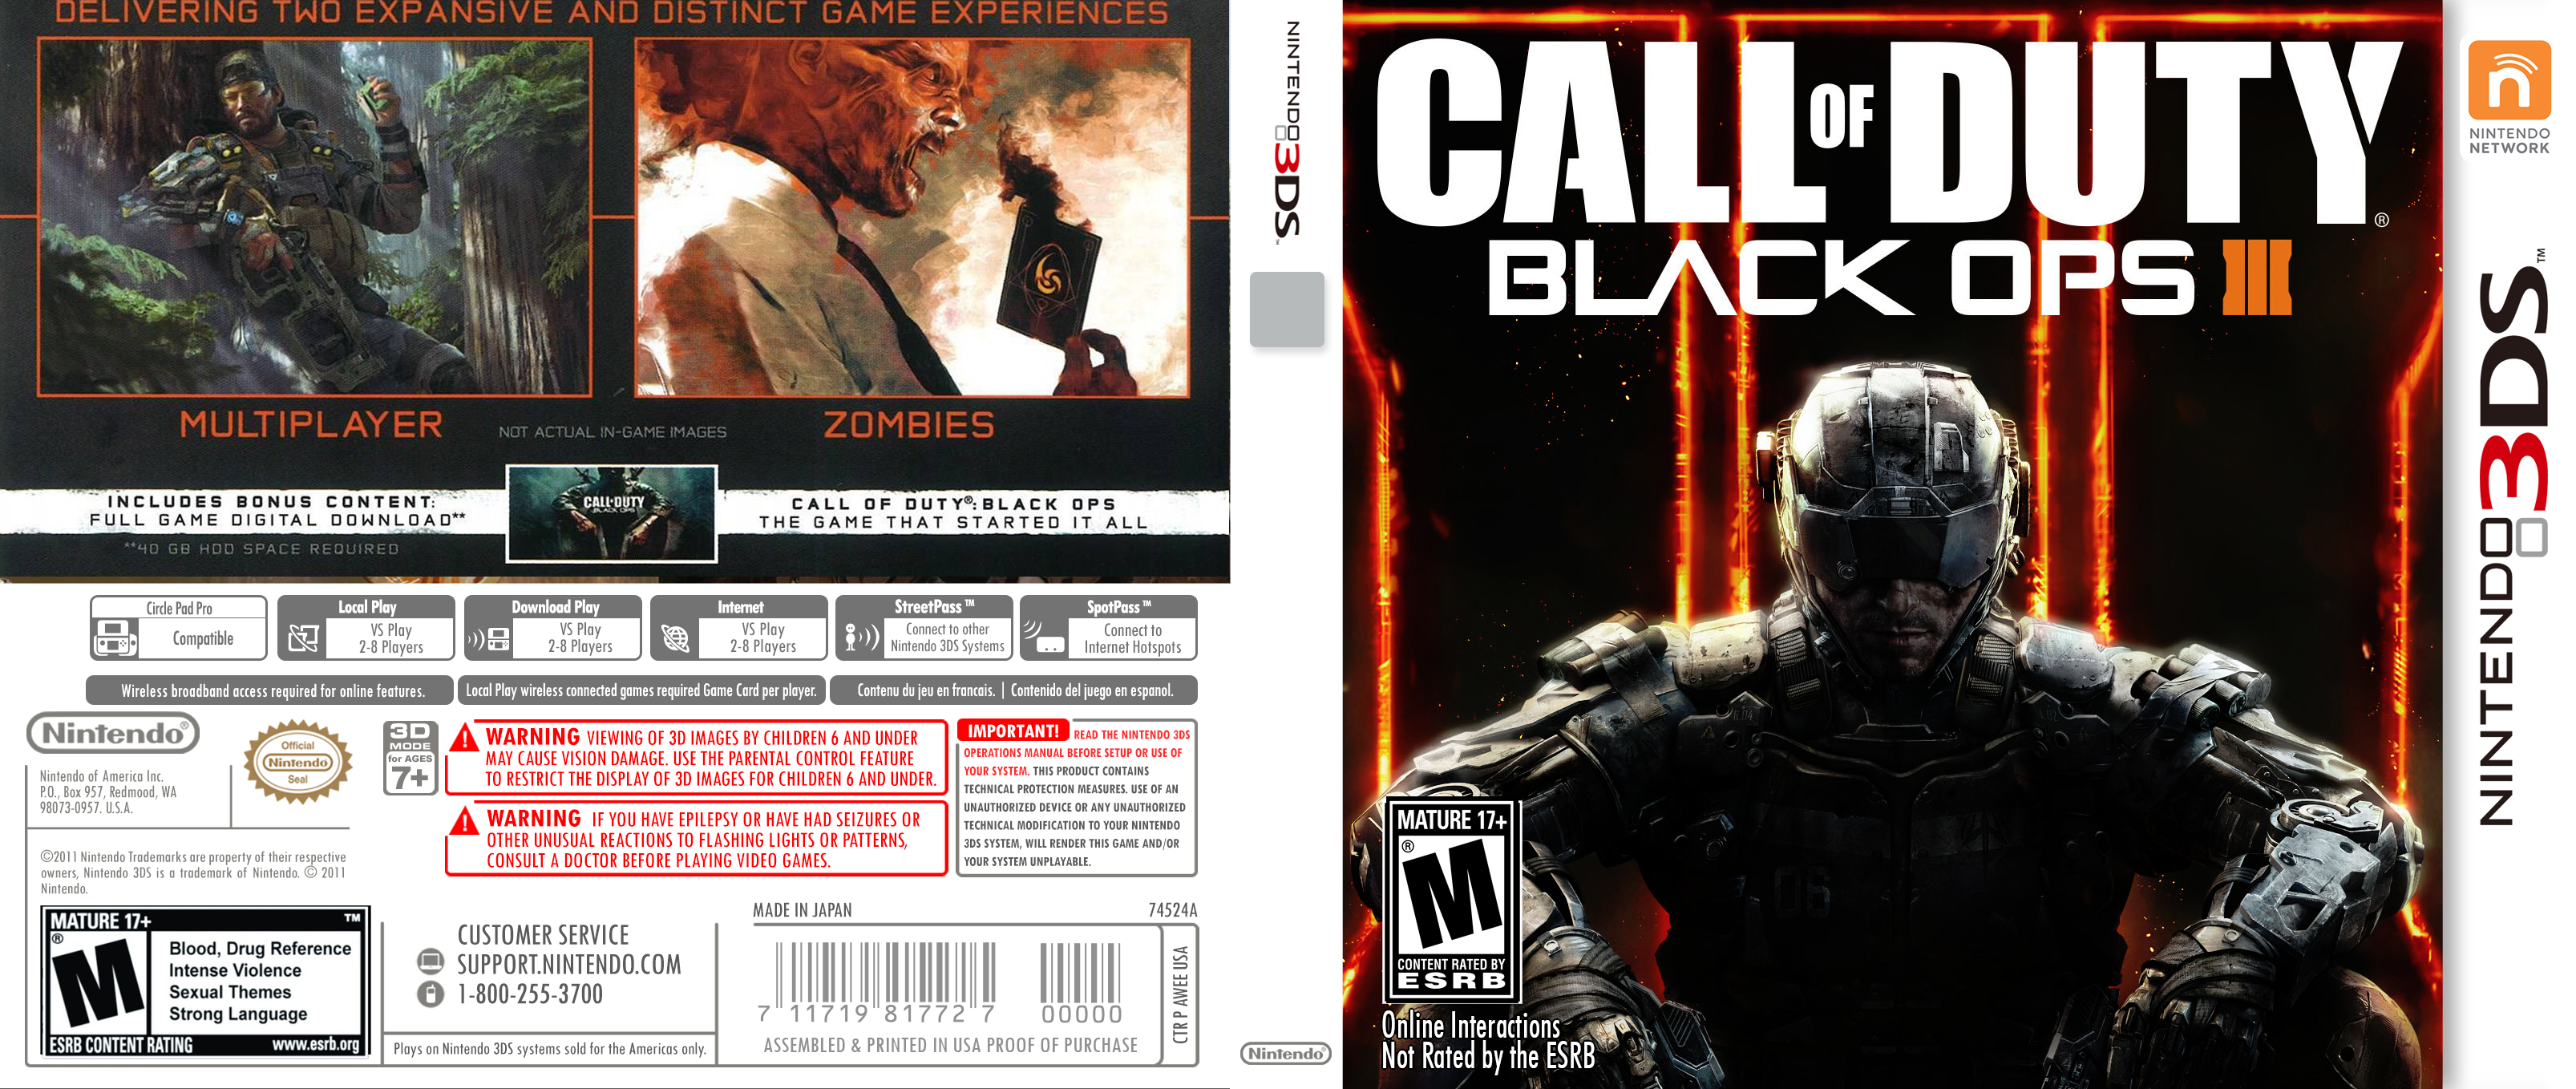 Call of Duty Black Ops 3 box cover